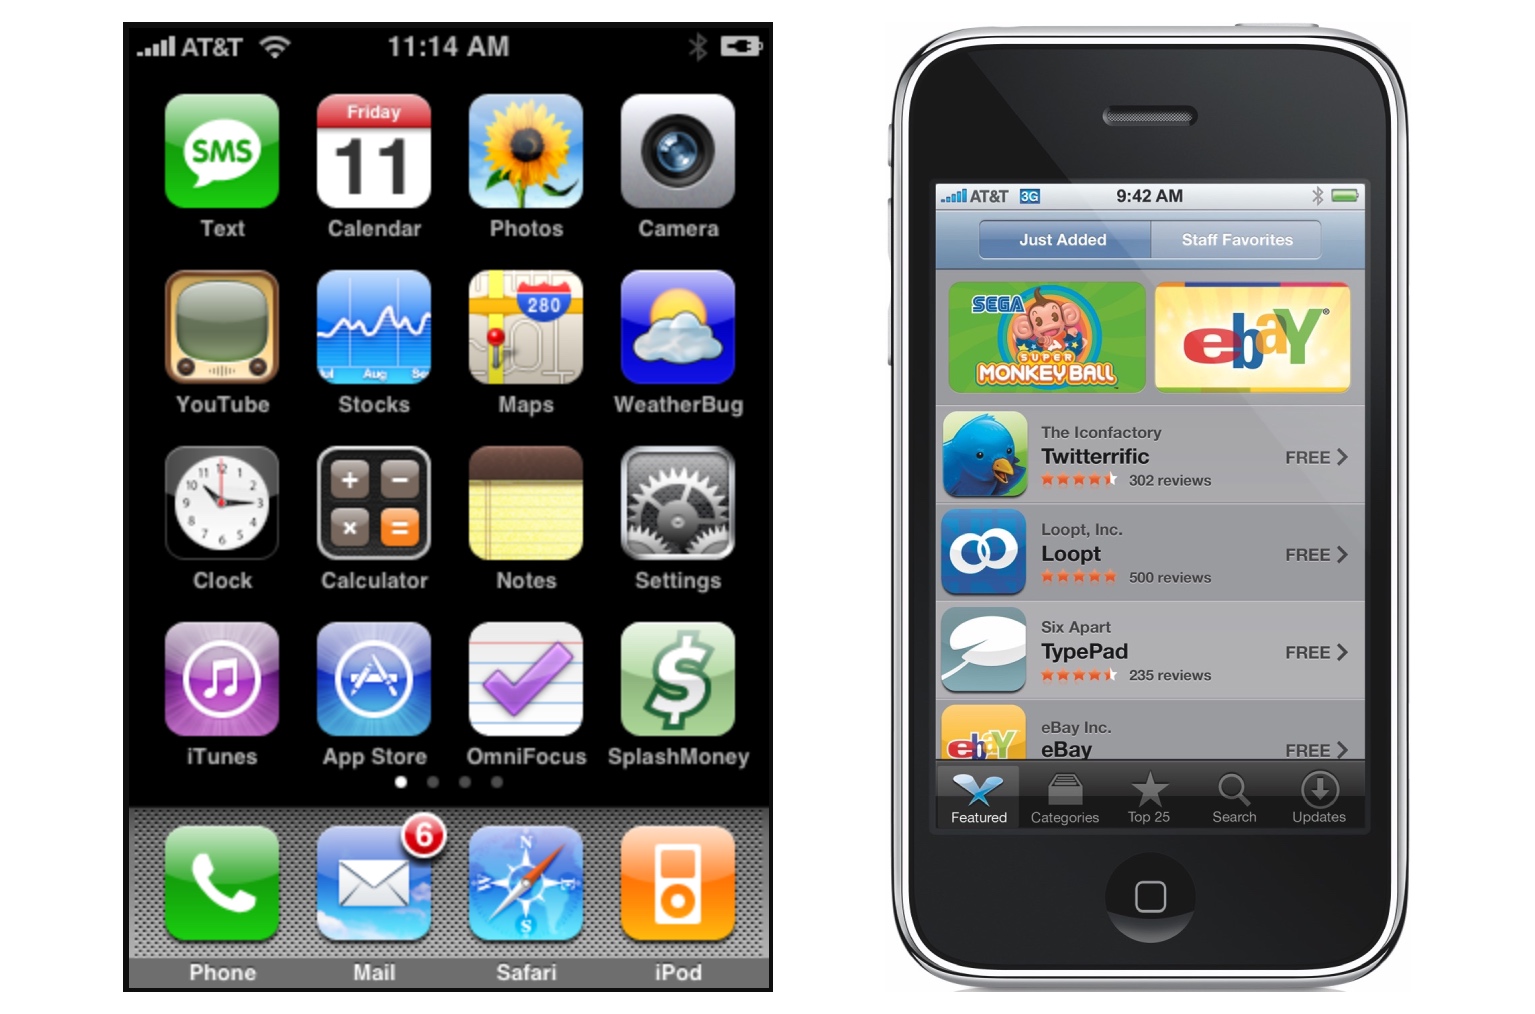 iPhone OS 2 Home screen and App Store on iPhone 3G (2008)